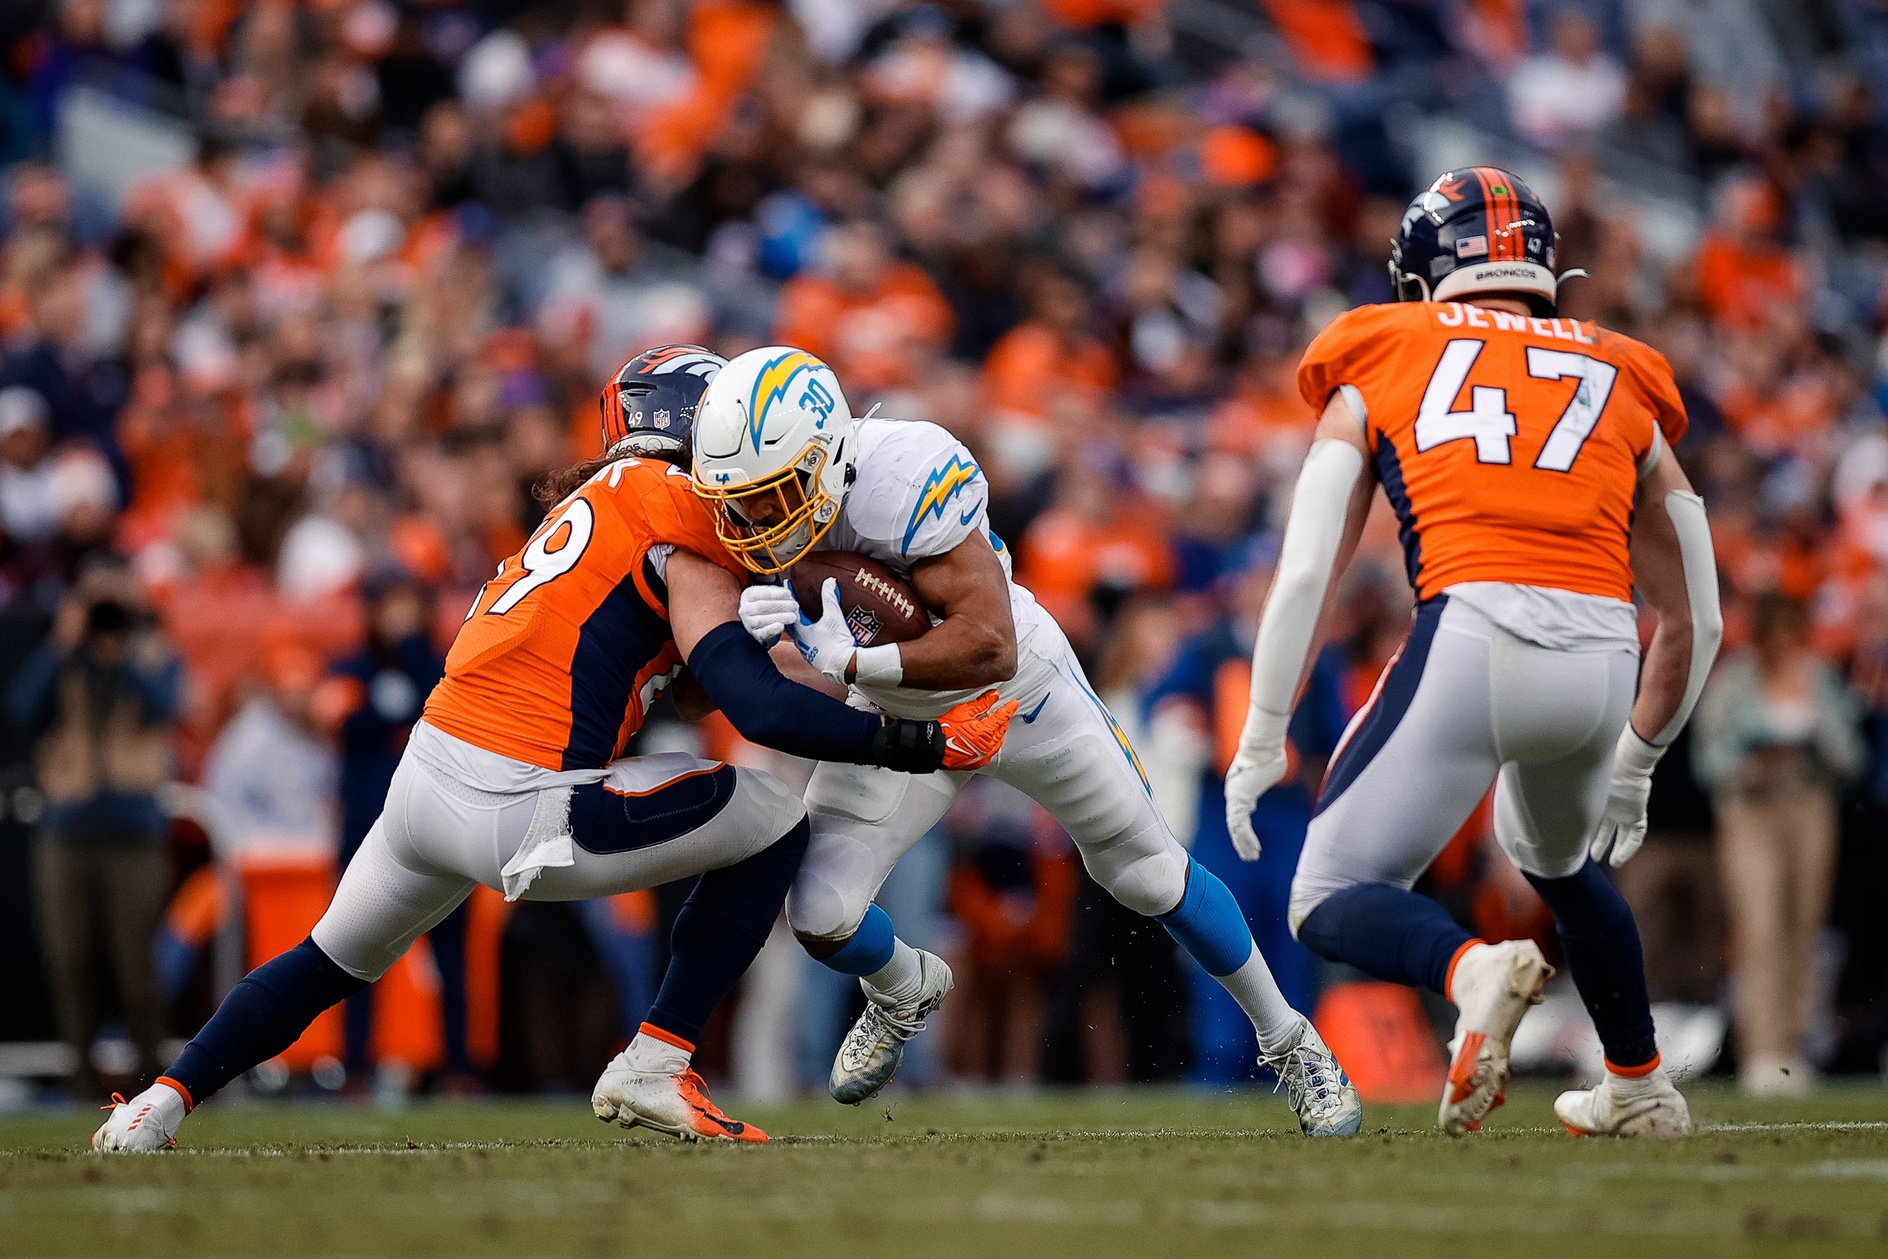 Los Angeles Chargers running back Austin Ekeler (30) is tackled by Denver Broncos linebacker Alex Singleton (49) as linebacker Josey Jewell (47) defends in the second quarter at Empower Field at Mile High.